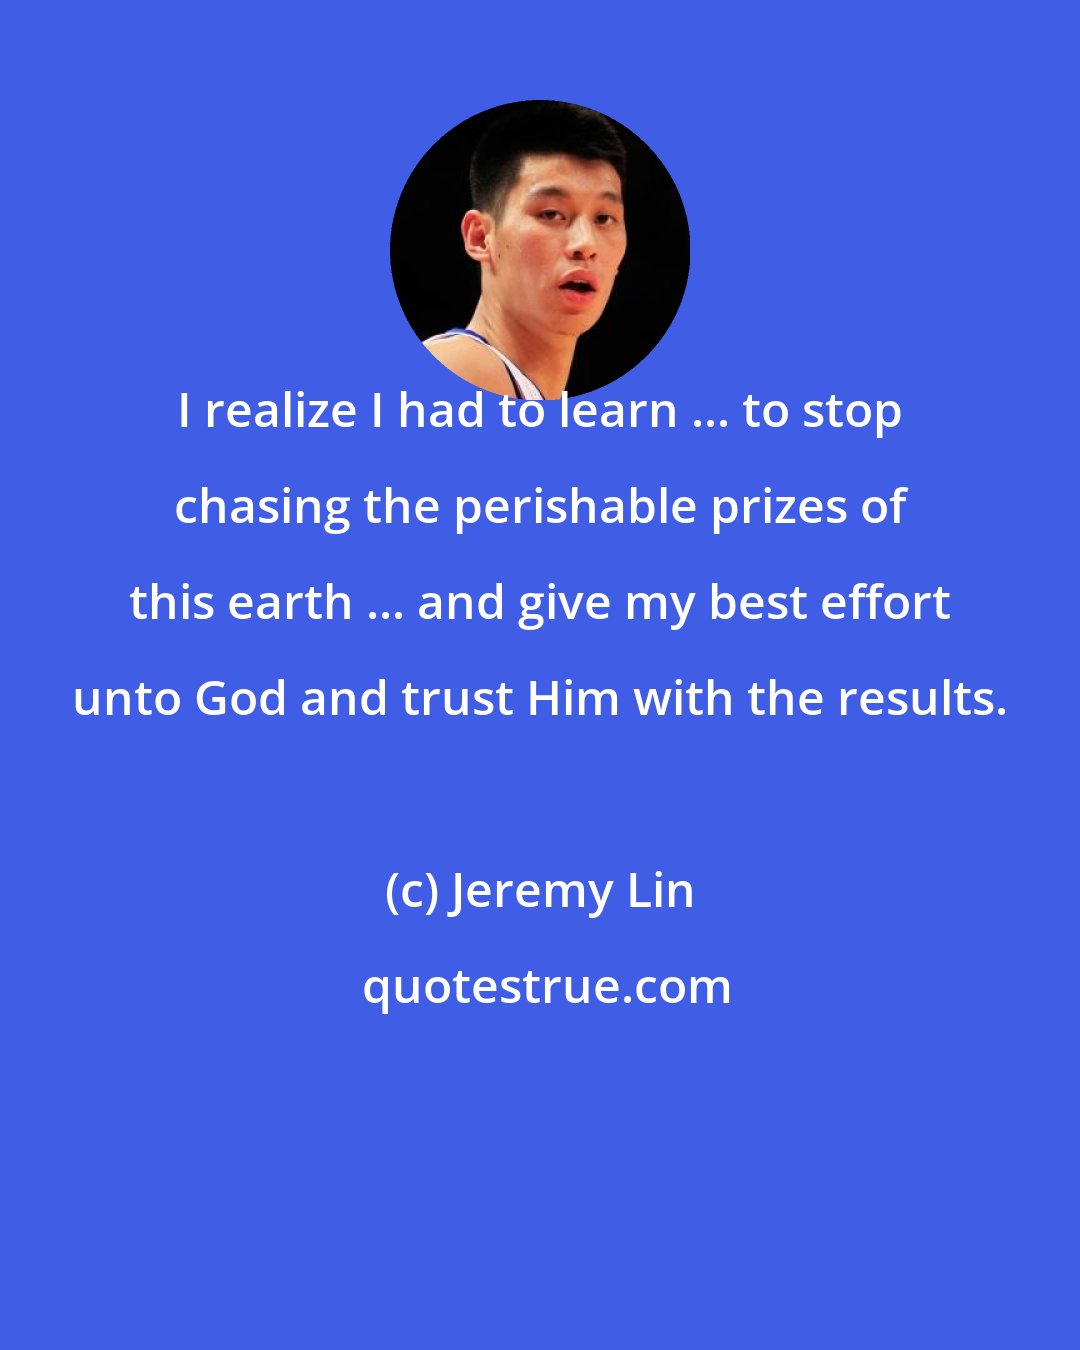 Jeremy Lin: I realize I had to learn ... to stop chasing the perishable prizes of this earth ... and give my best effort unto God and trust Him with the results.